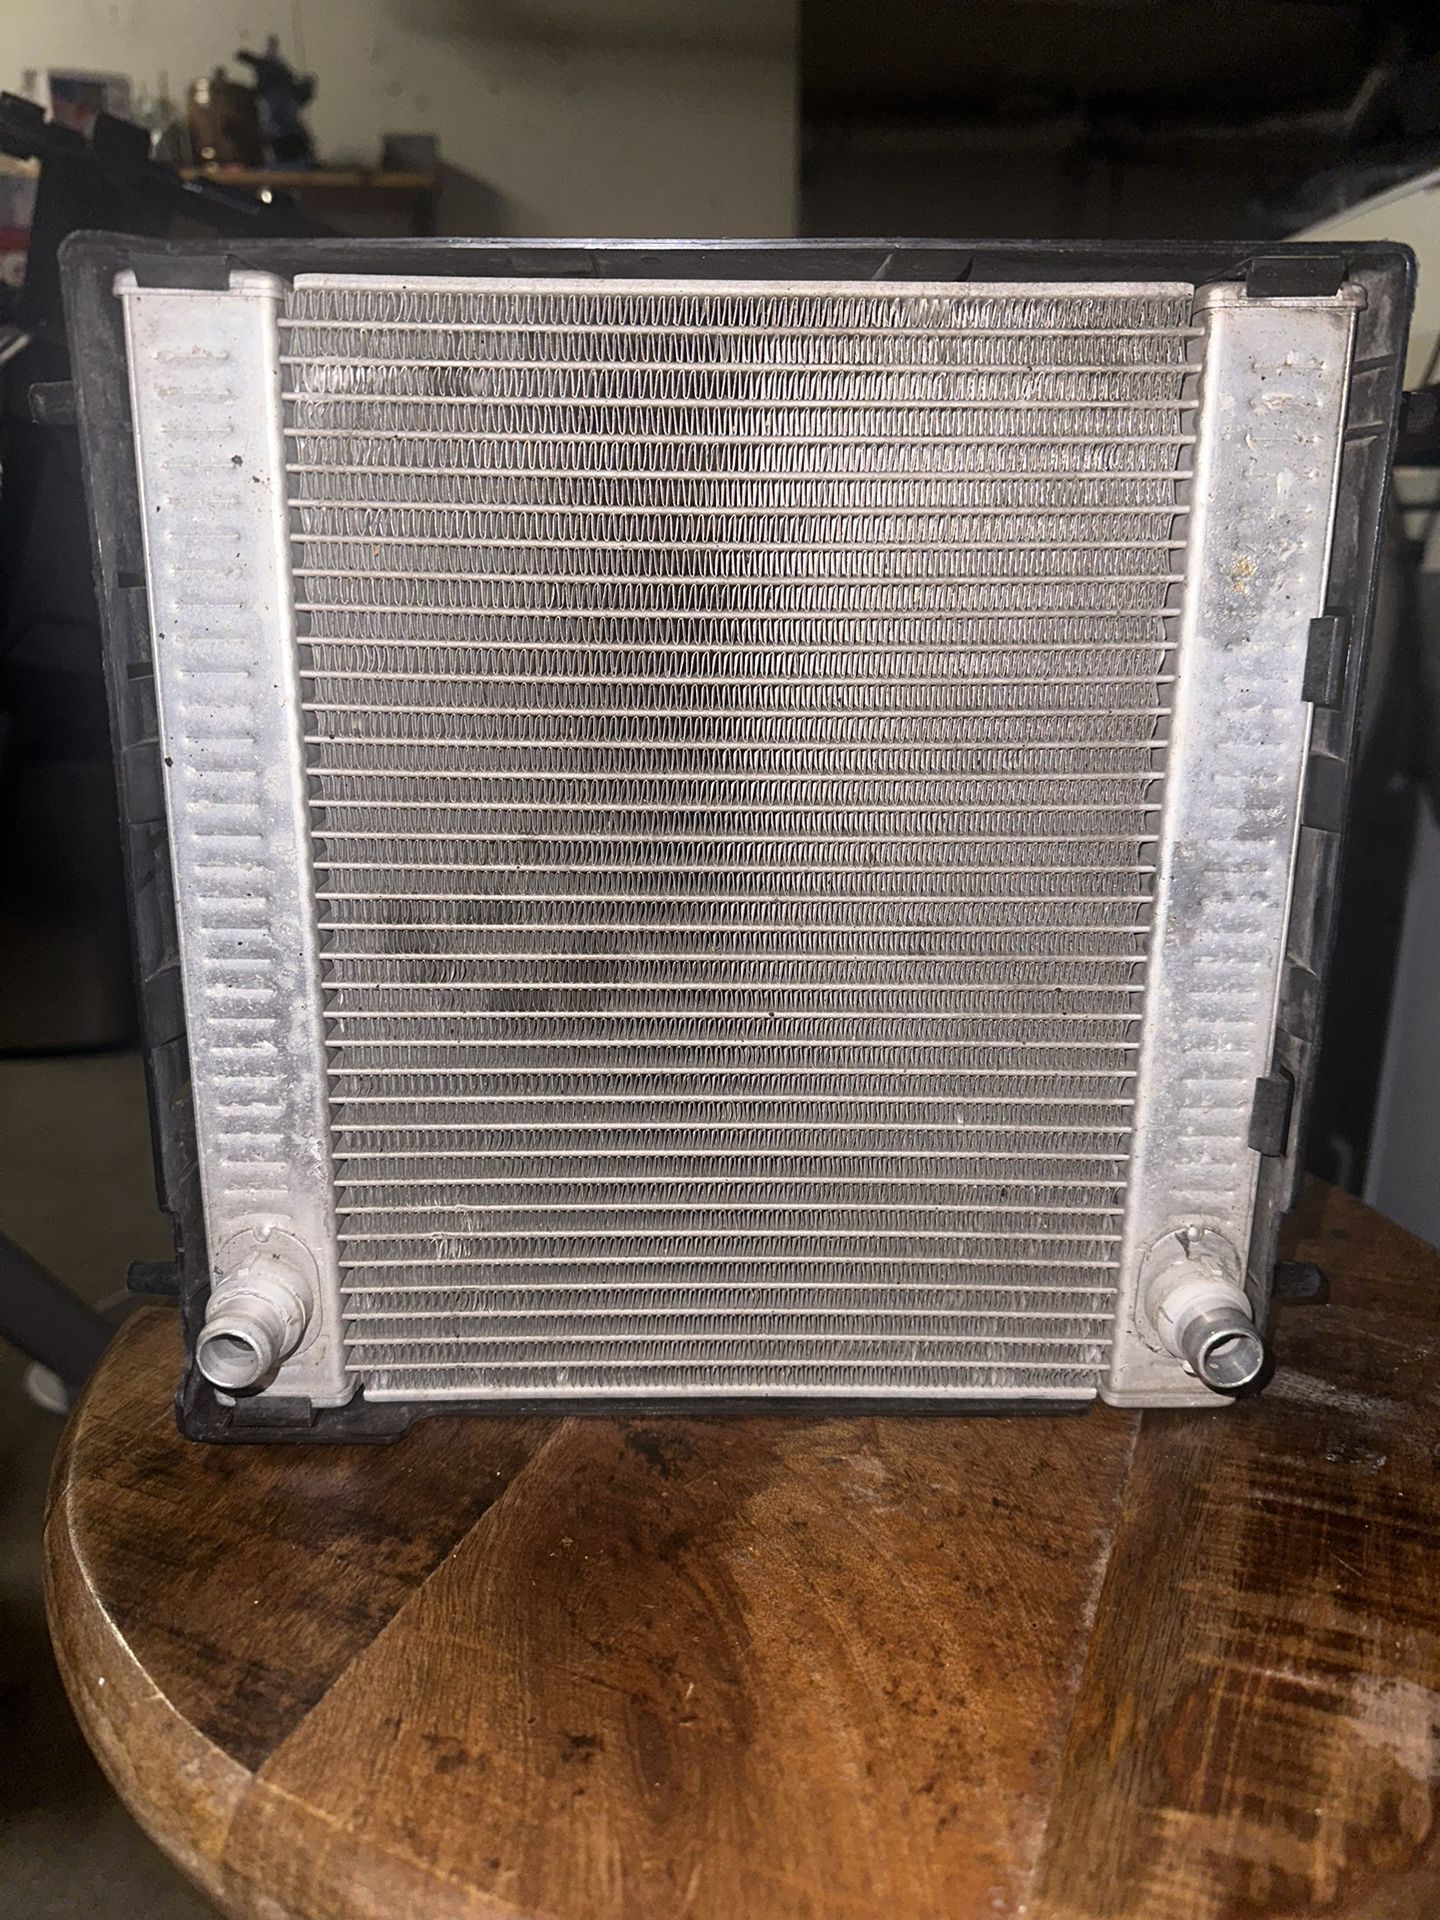 BMW 7 Series G11, G12 Secondary Auxiliary Coolant Radiator, (contact info removed)